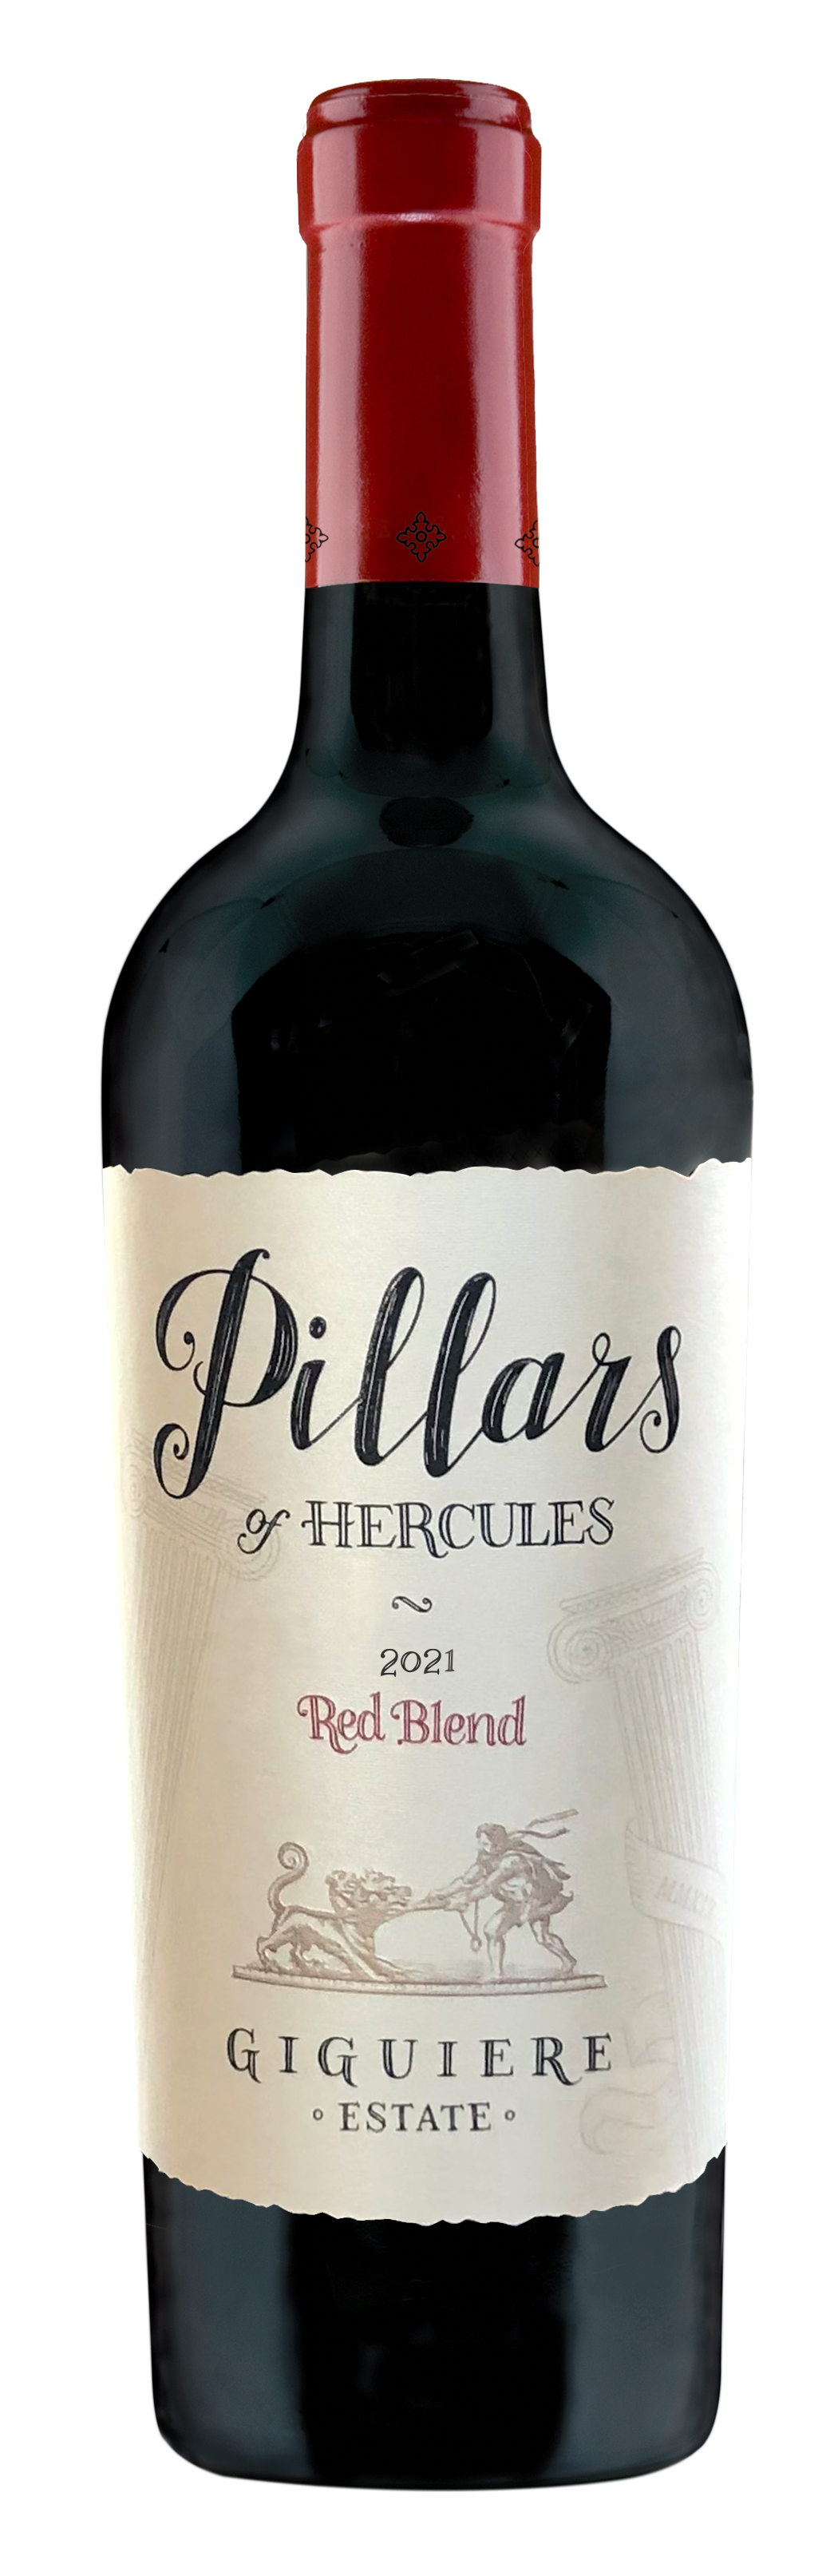 Product Image for 2021 Pillars of Hercules Red Blend, Giguiere Estate